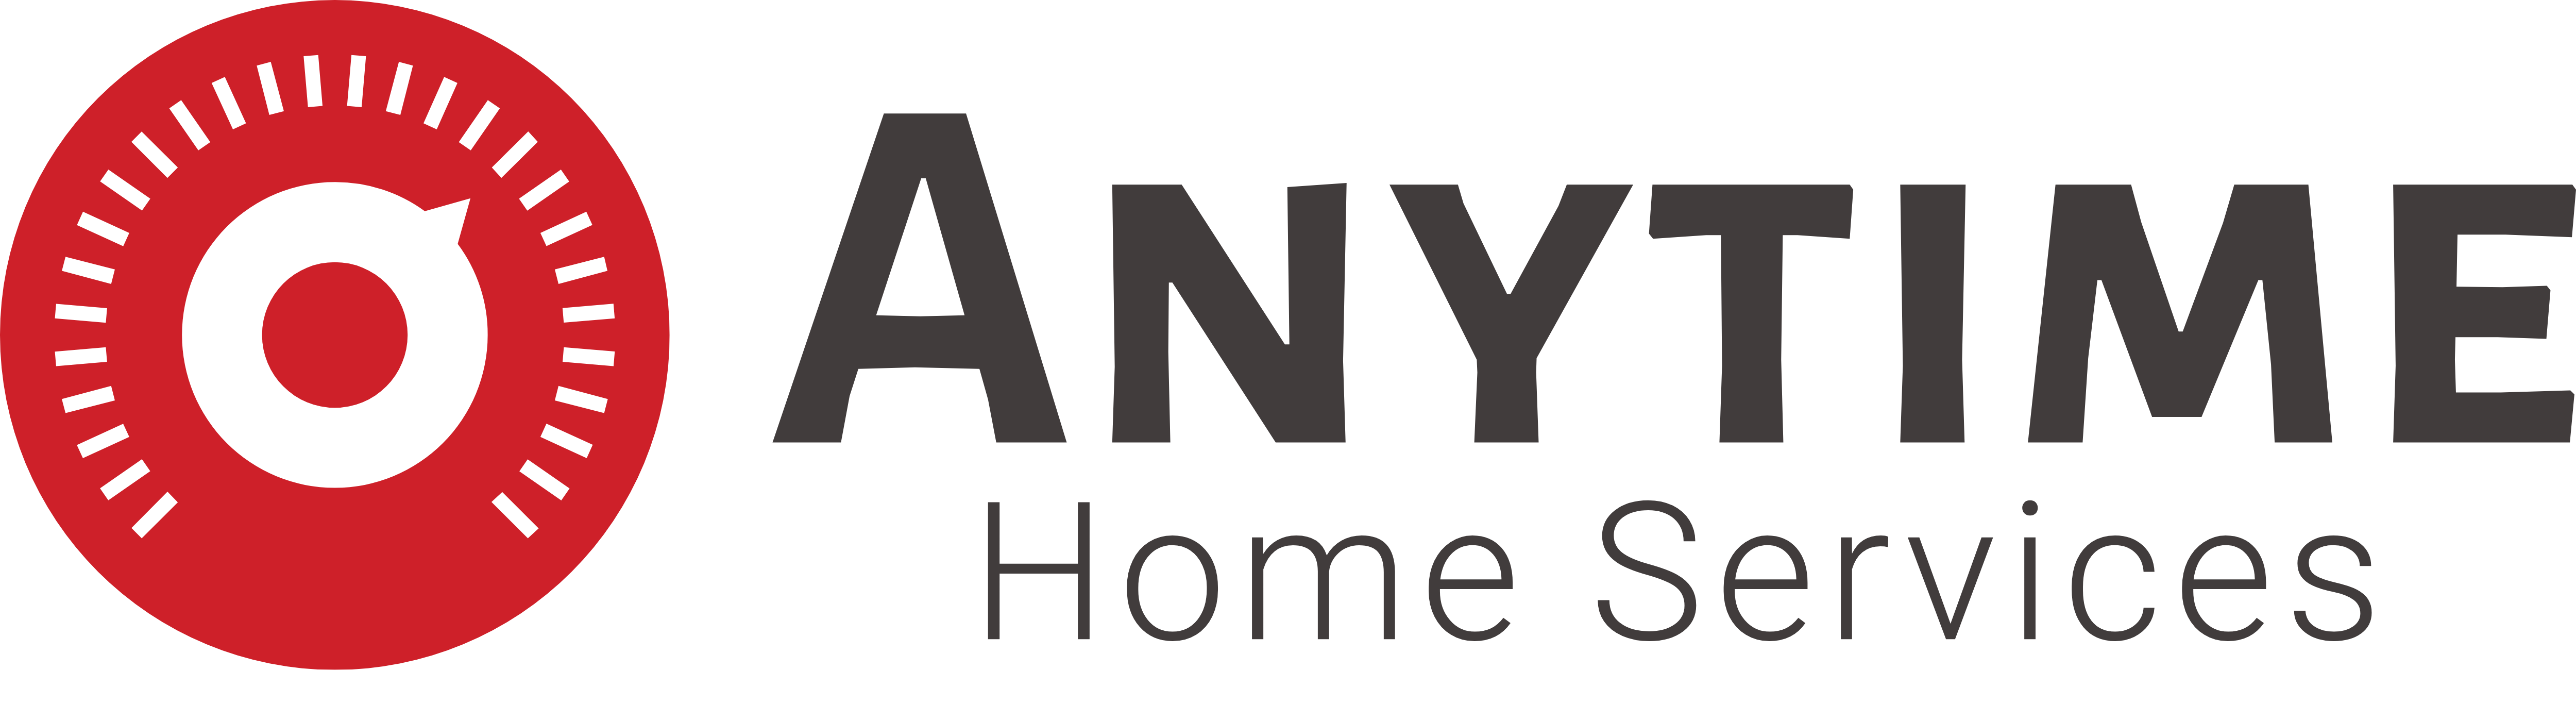 Anytime Home Services